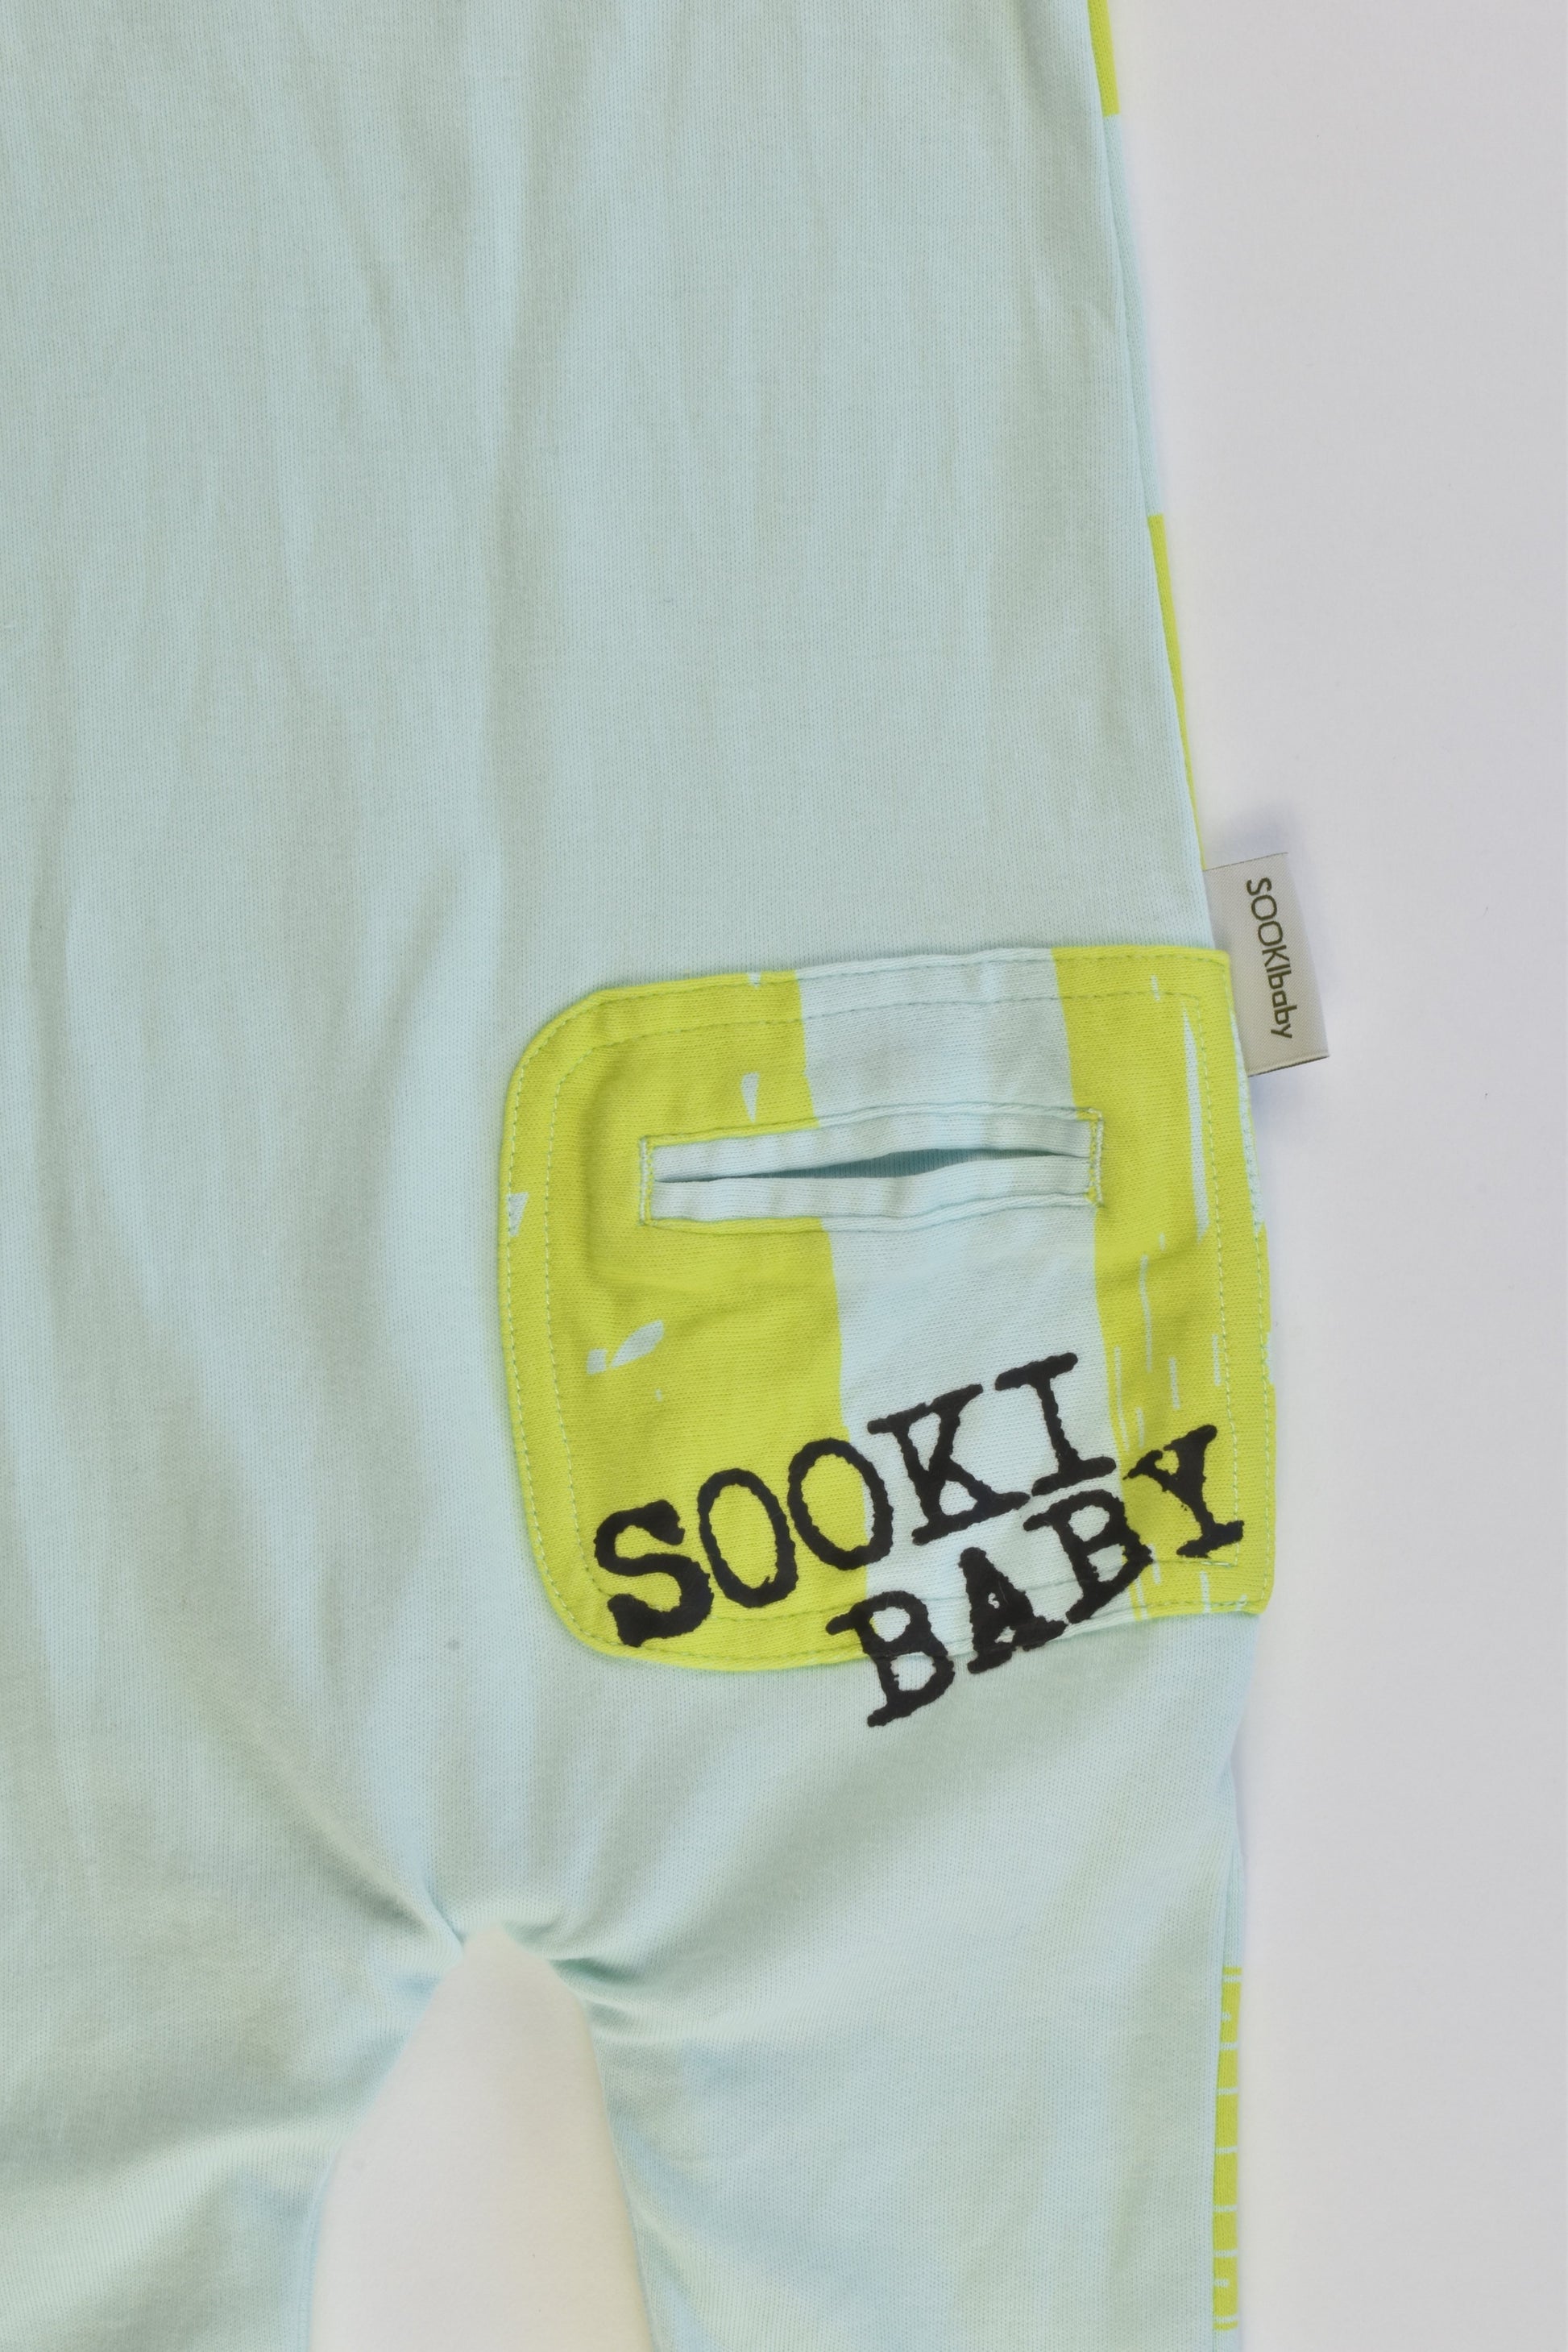 SOOKIbaby Size 00 'Worn By A Funky Little Monkey' Playsuit